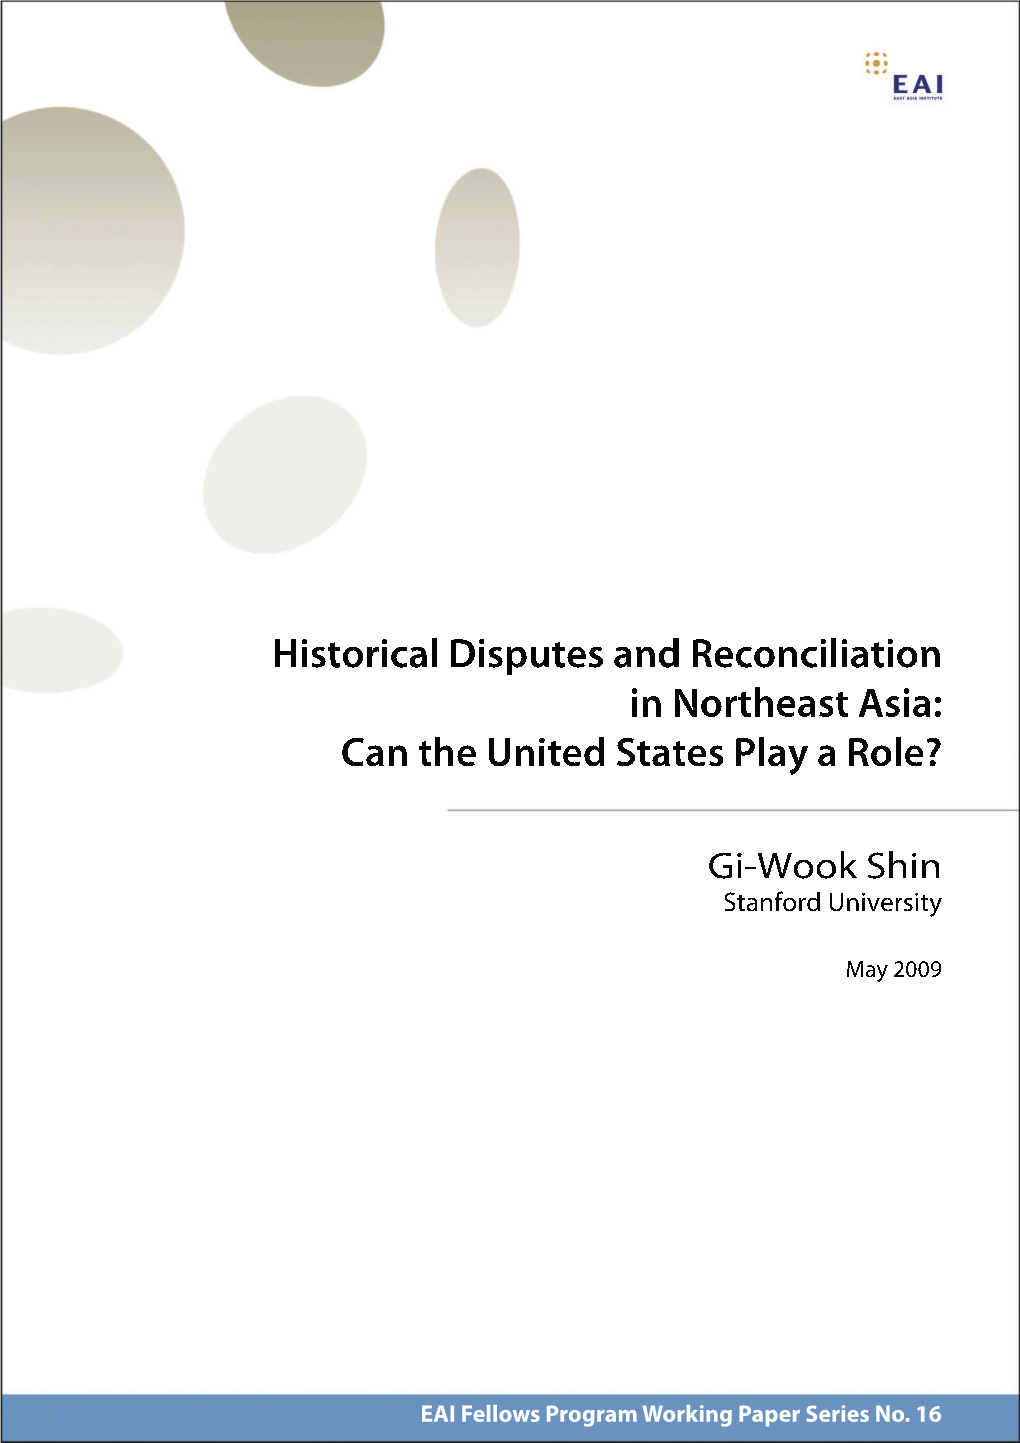 Historical Disputes and Reconciliation in Northeast Asia: Can the United States Play a Role?1